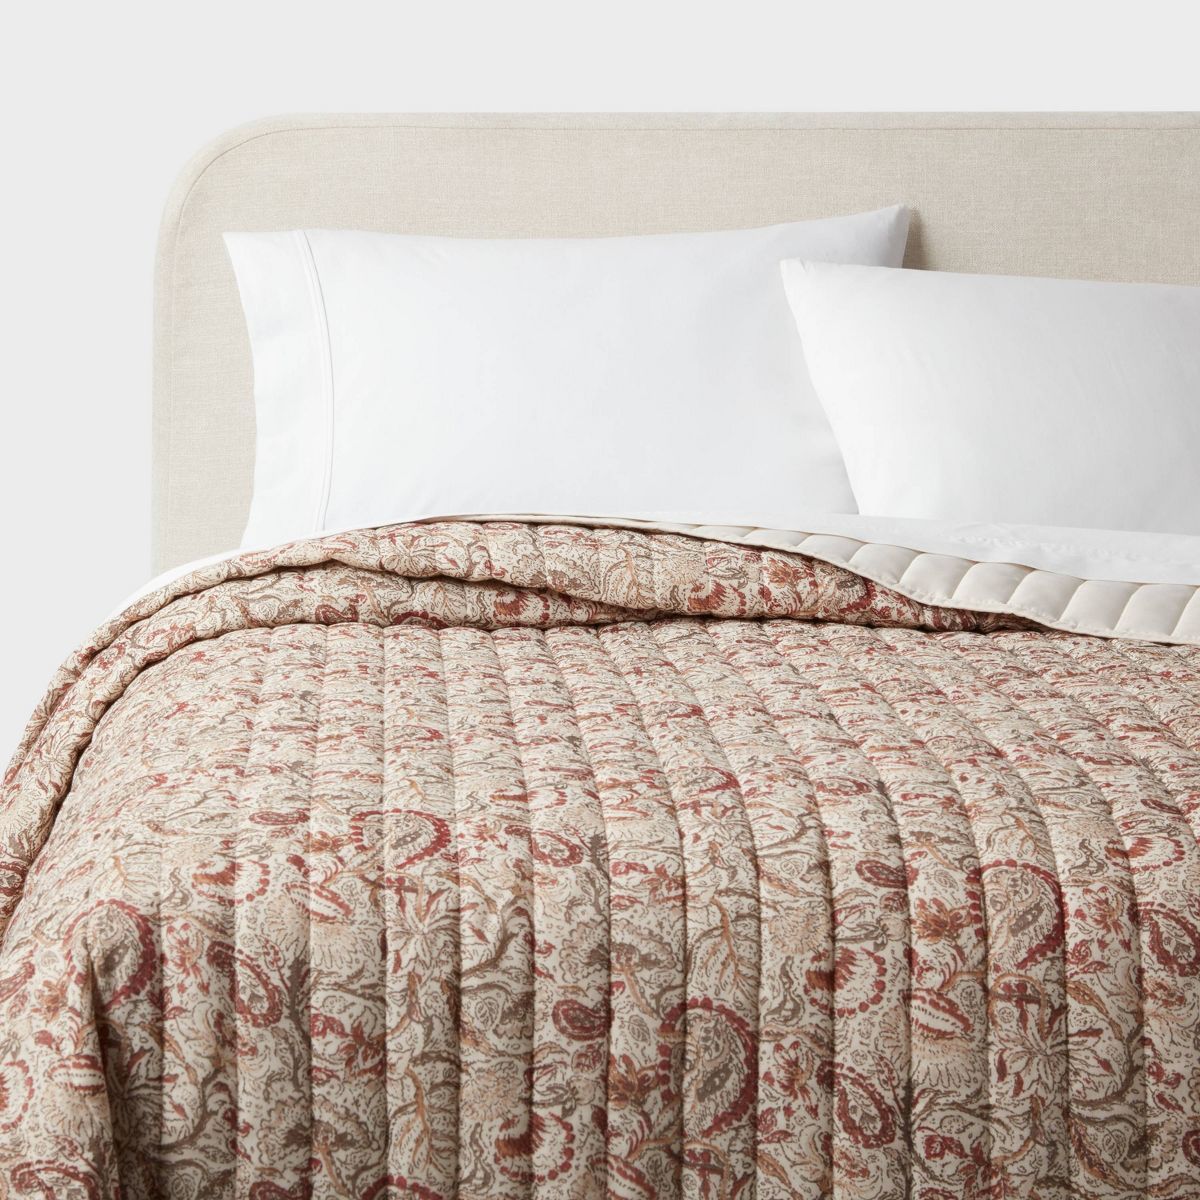 Voile Paisley Printed Quilt Cream - Threshold™ | Target